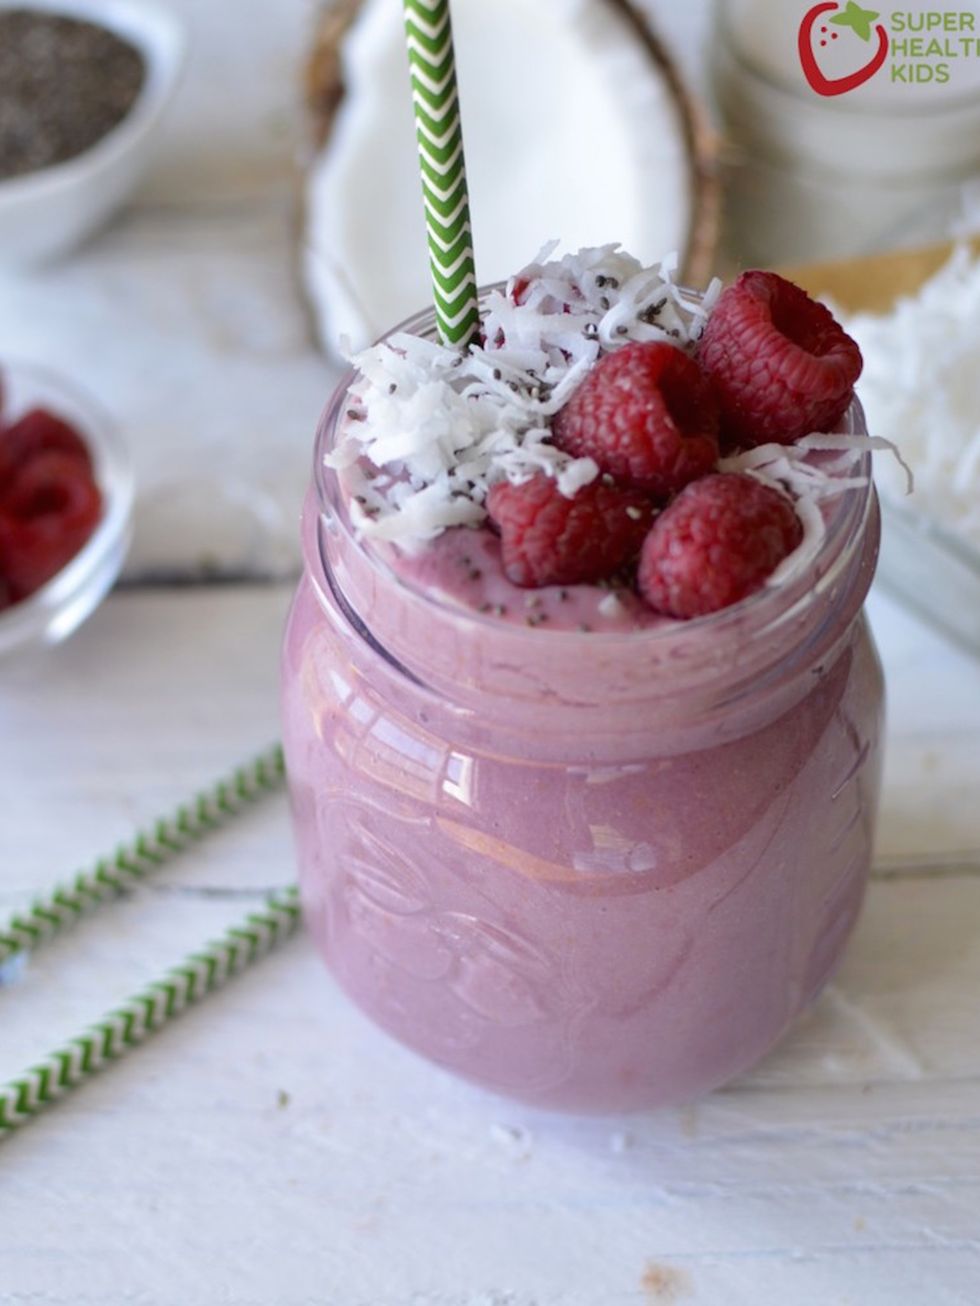 <p><strong>7.3K Shares</strong>. Coconut and raspberry? What's not to like. Healthy essential fatty acids from the coconut and chia seeds are really good for the skin. Full recipe and instructions from <a href="http://www.superhealthykids.com/coconut-rasp